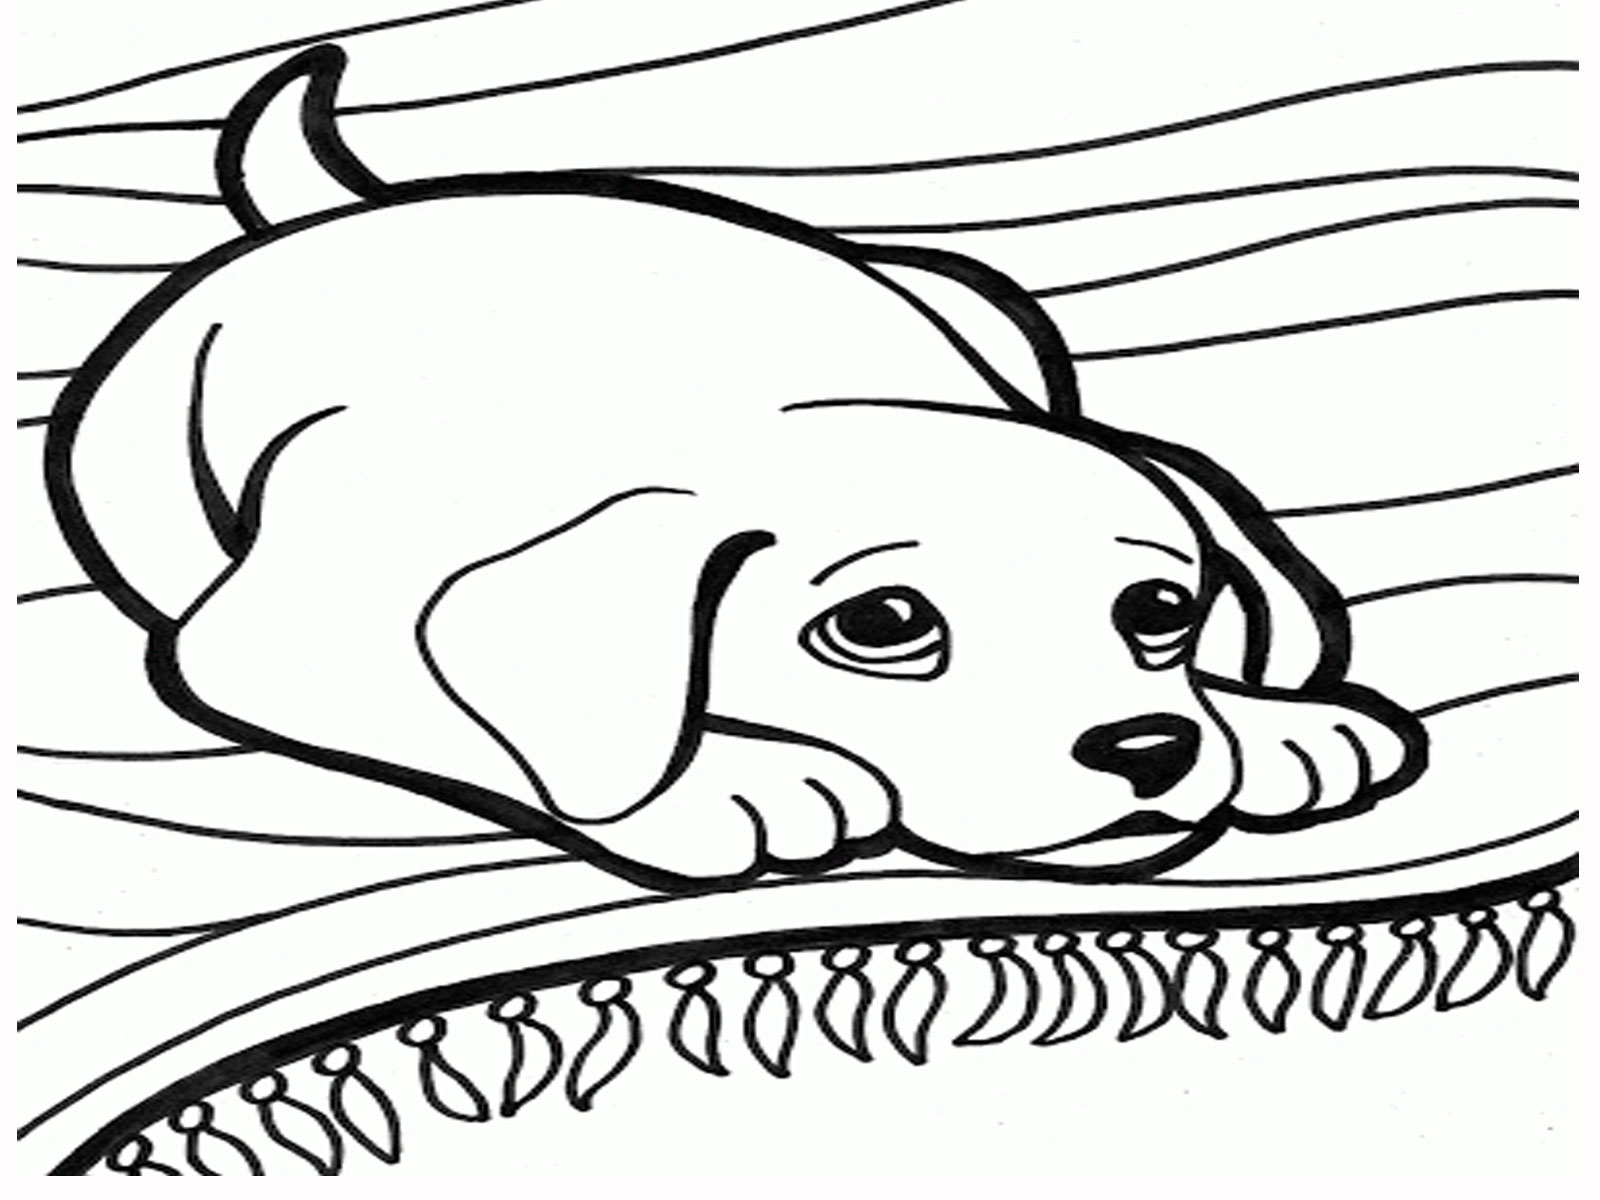 Coloring book dogs on Pinterest Coloring Pages, Precious  - dog coloring pages printable